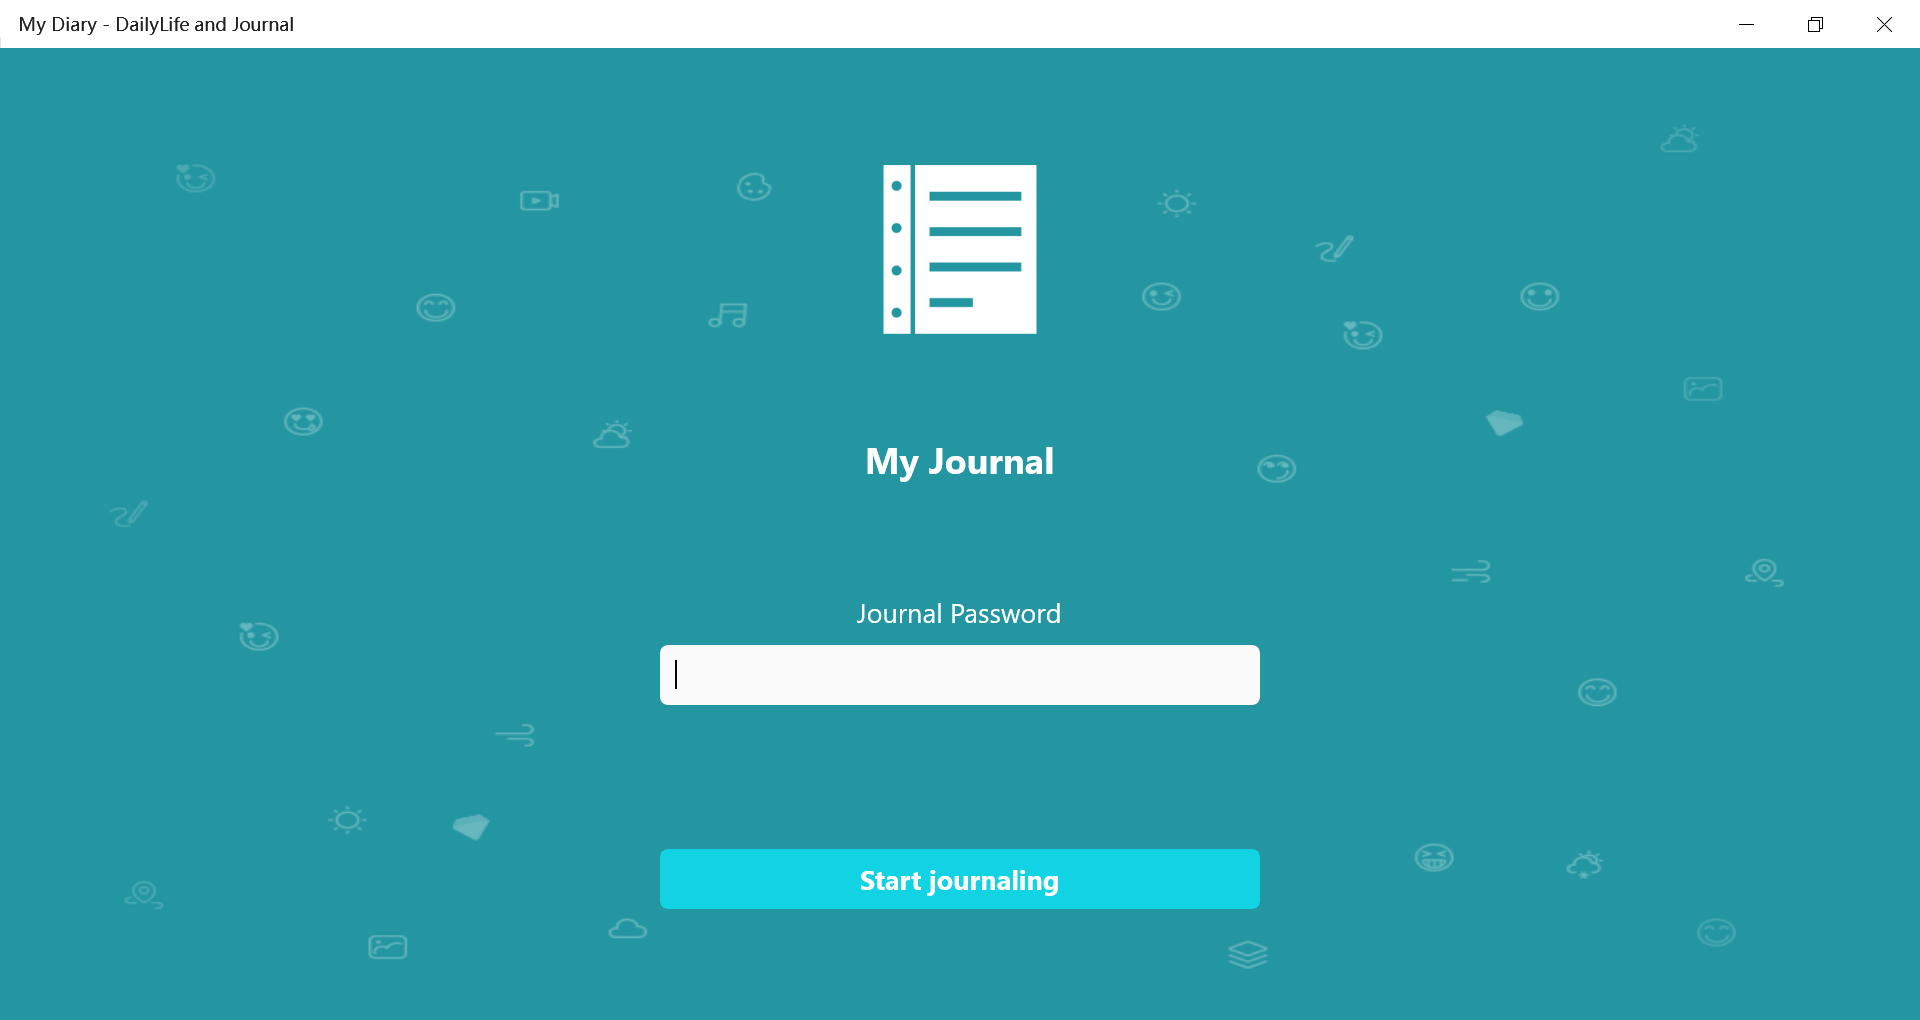 My Diary - DailyLife and Journal